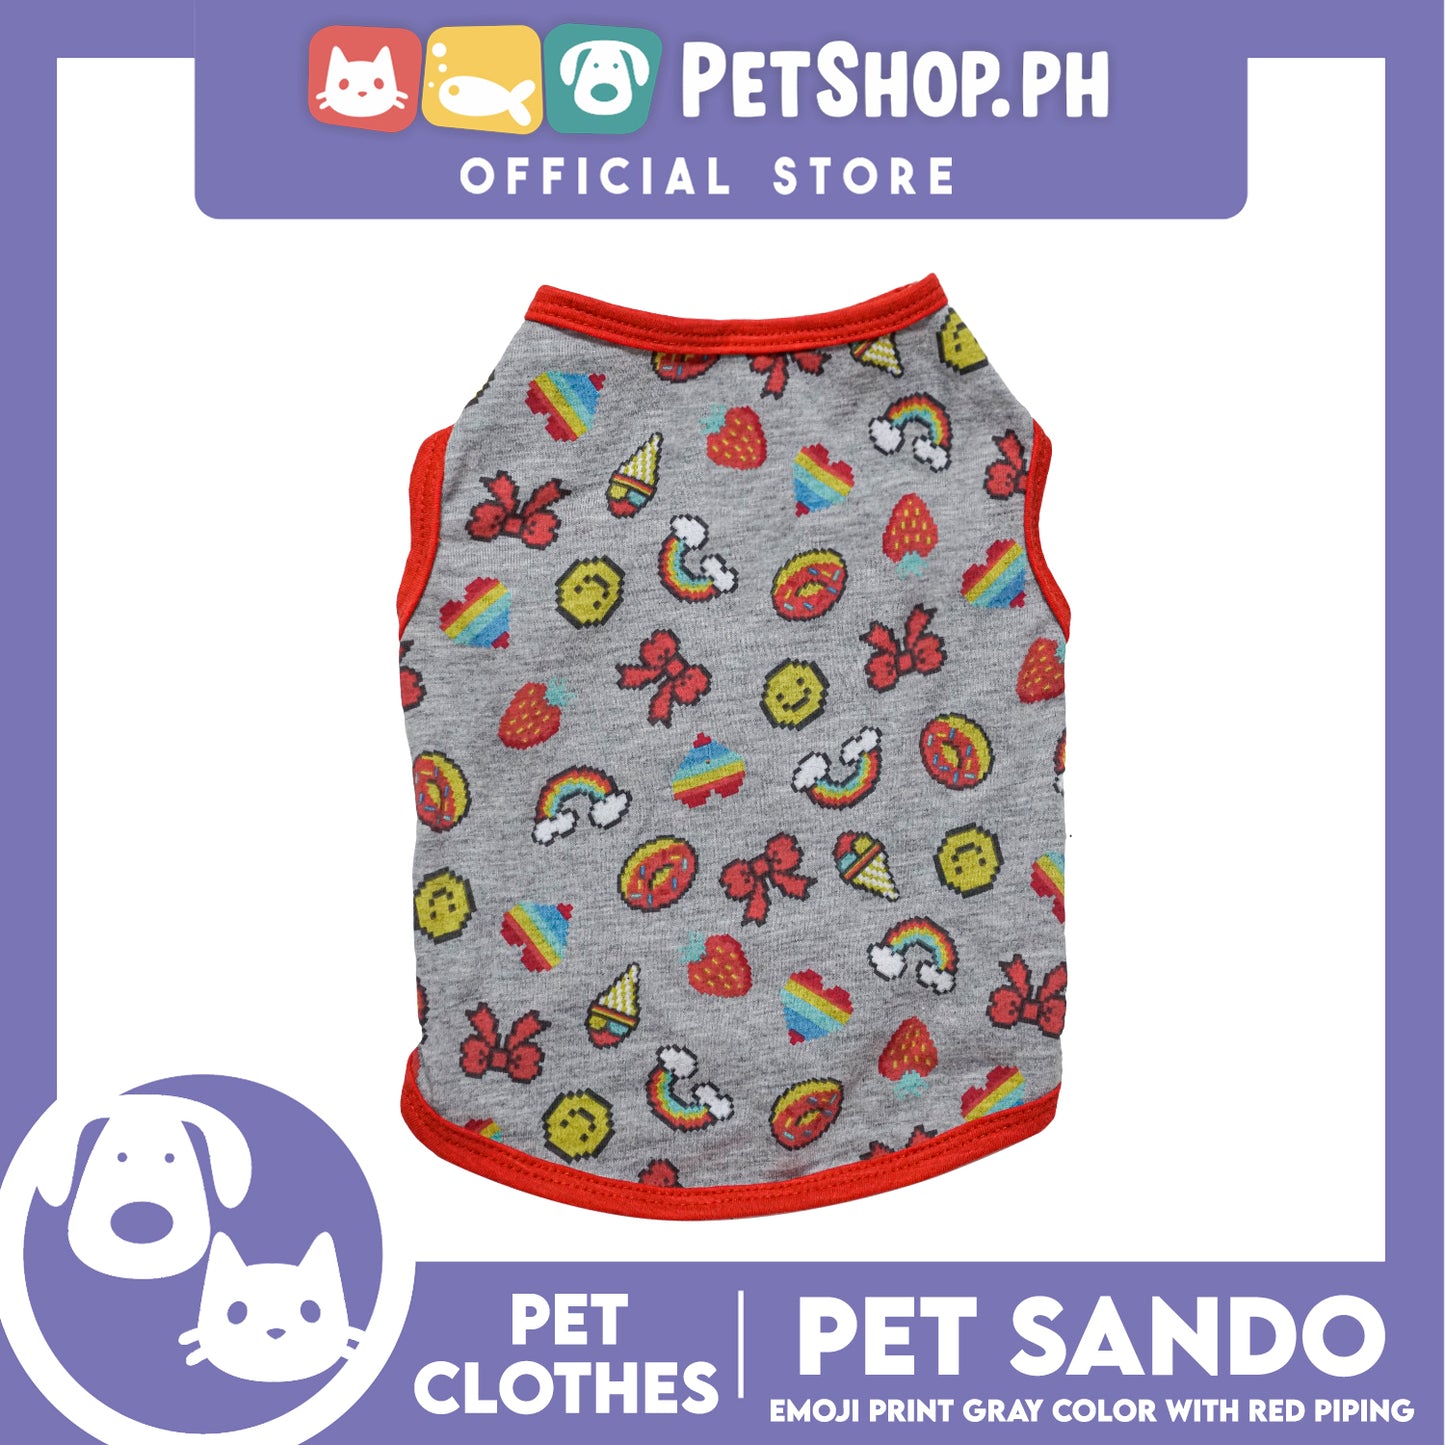 Pet Sando Emoji Print Gray Sando with Red Piping (Large) Perfect Fit for Dogs and Cats